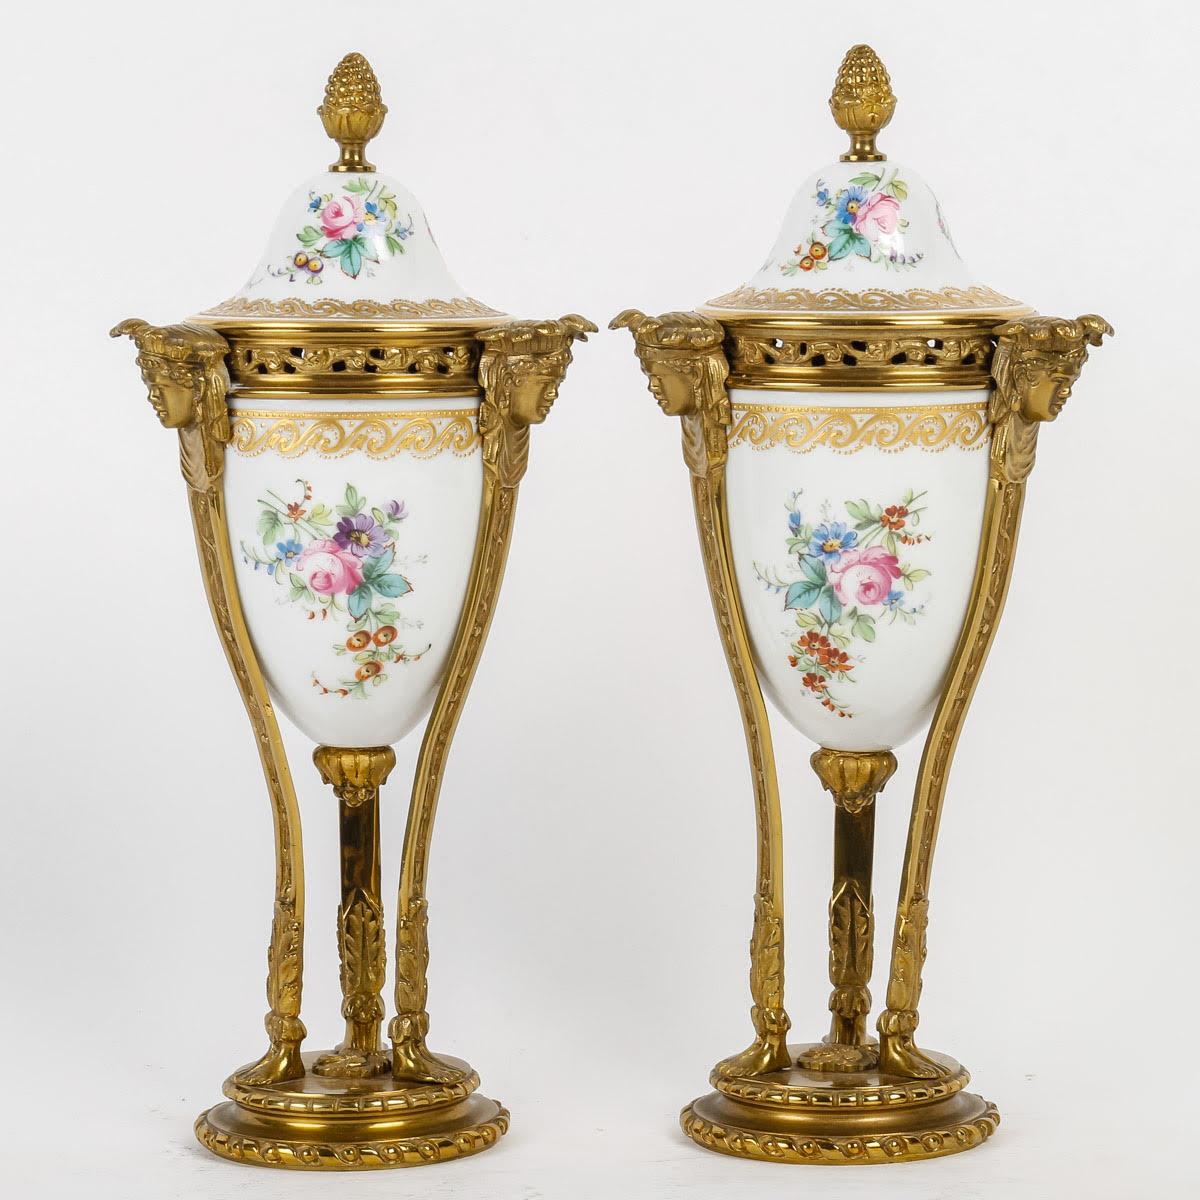 Art Nouveau Pair of Perfume Burners from the Manufacture de Sèvres, Early 20th Century.